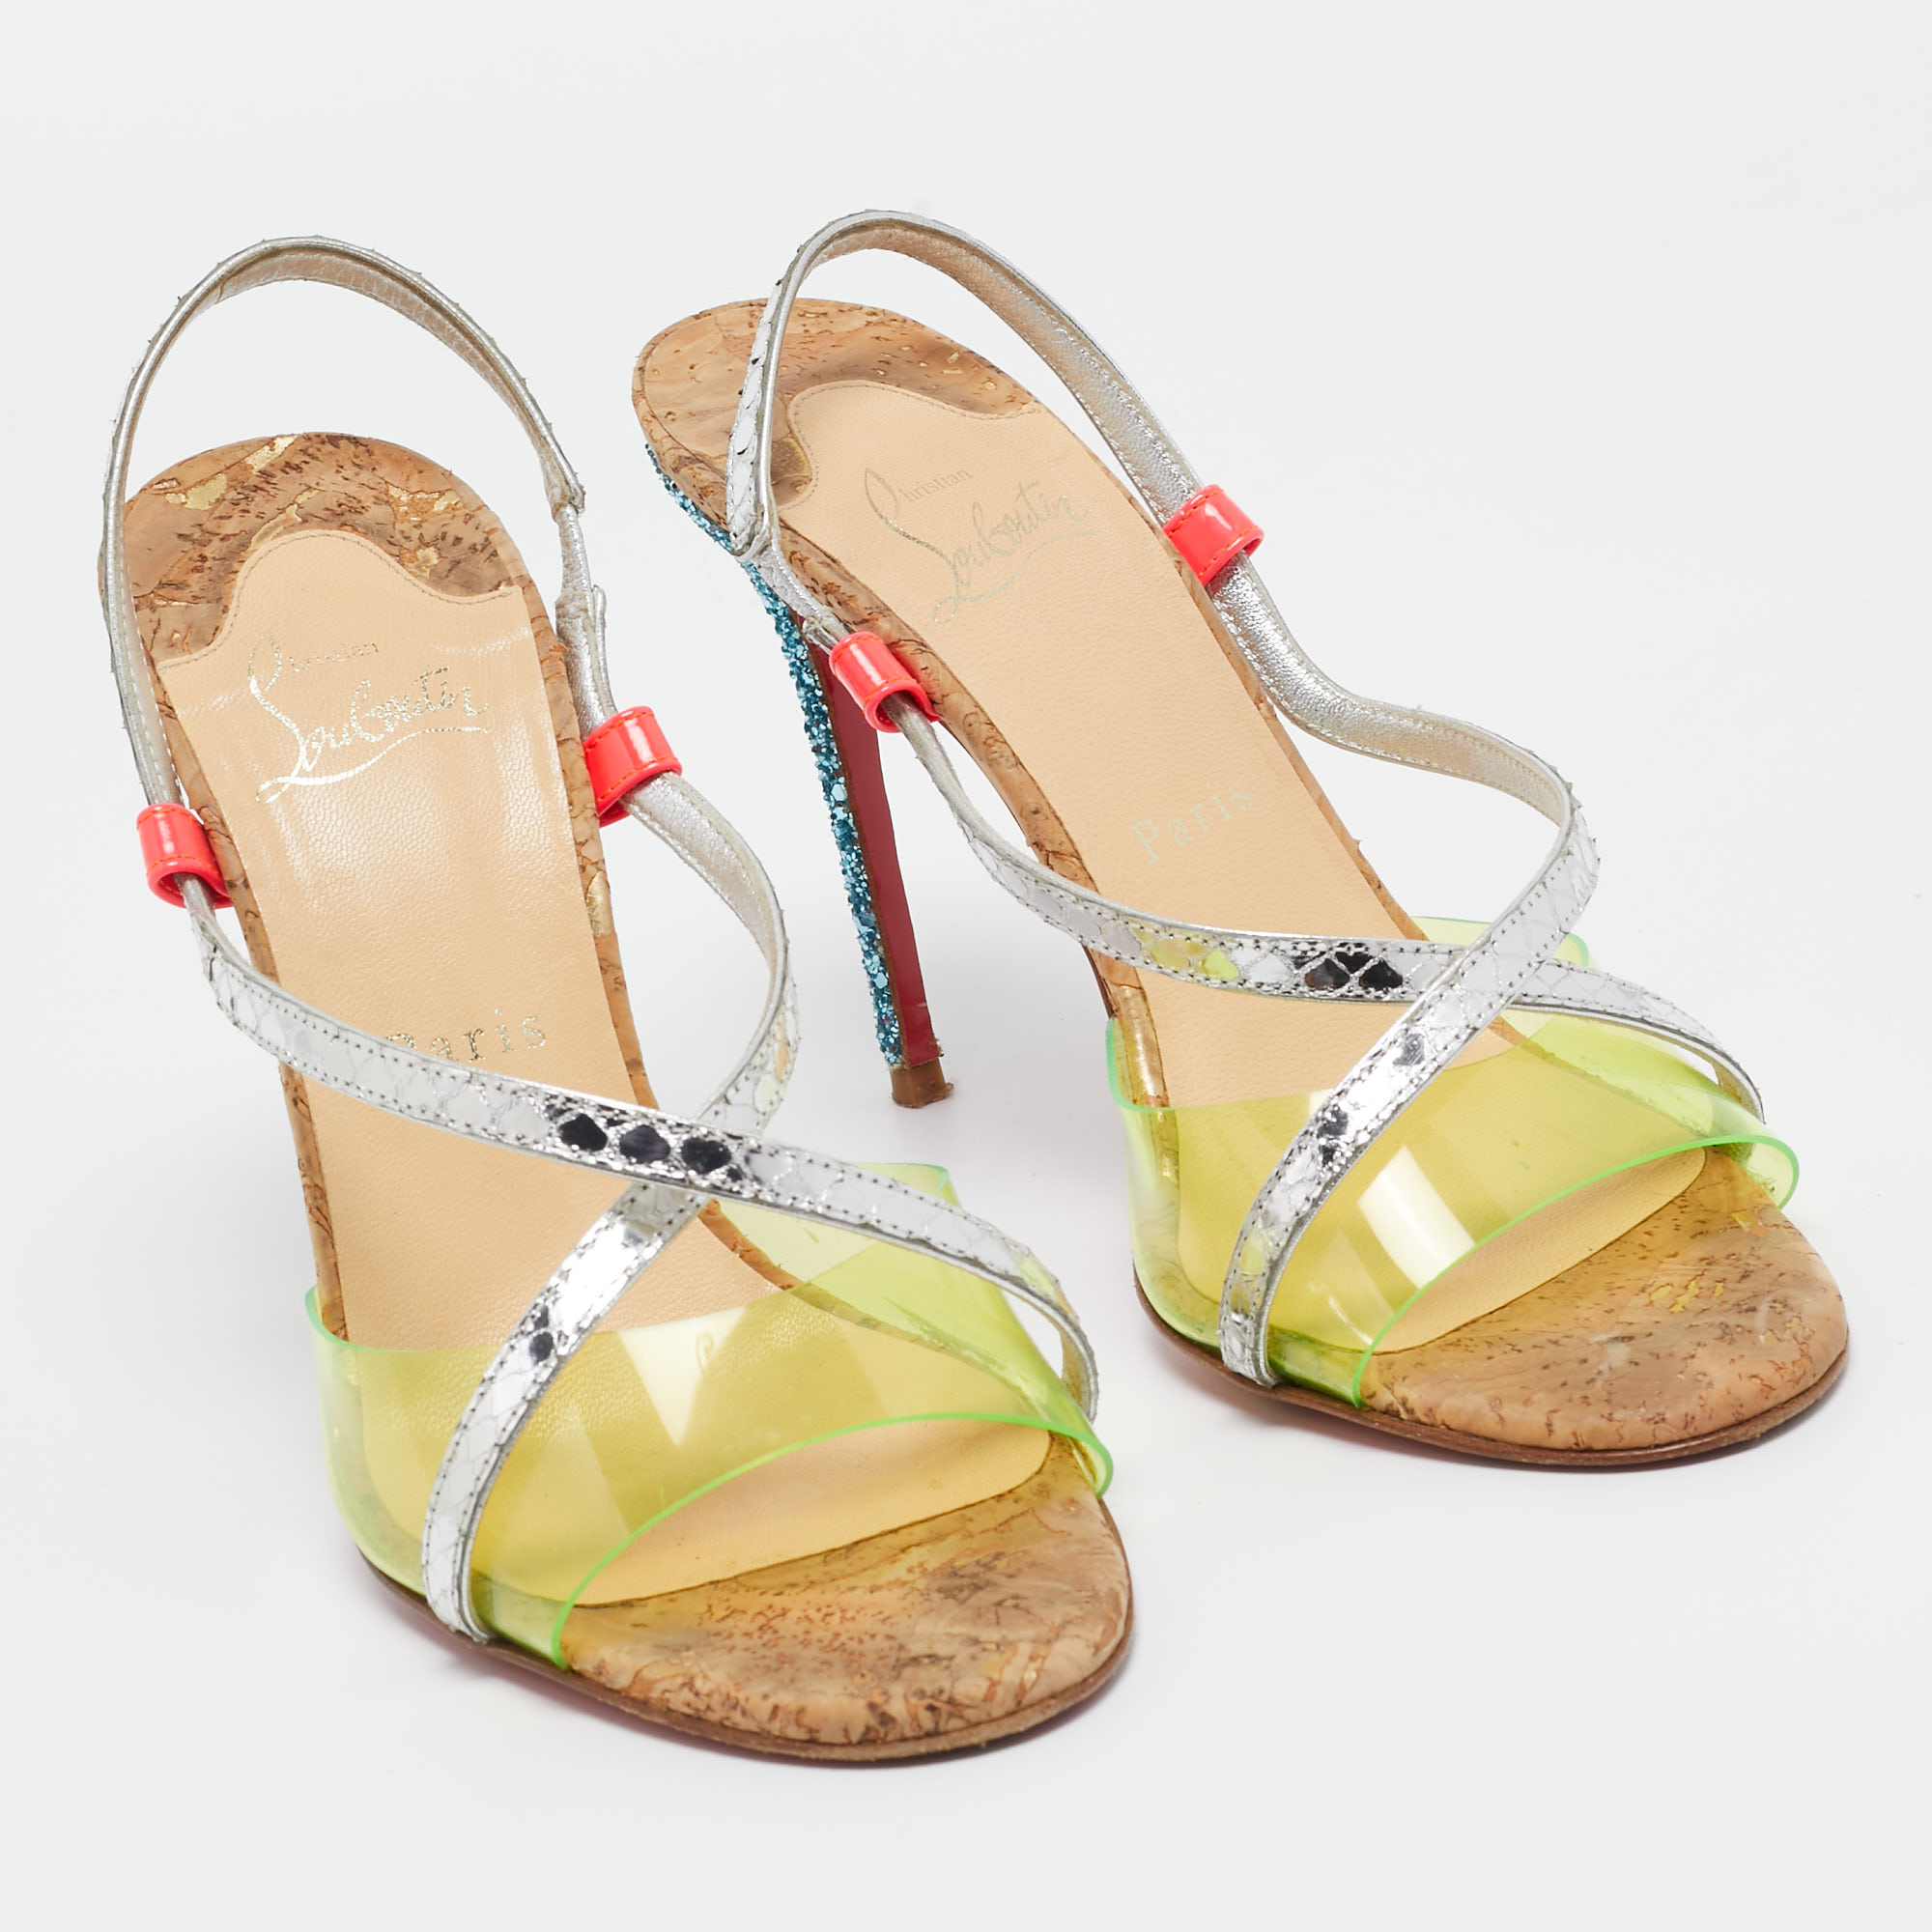 Christian Louboutin Multicolor Python Embossed And PVC Slingback Sandals Size 38